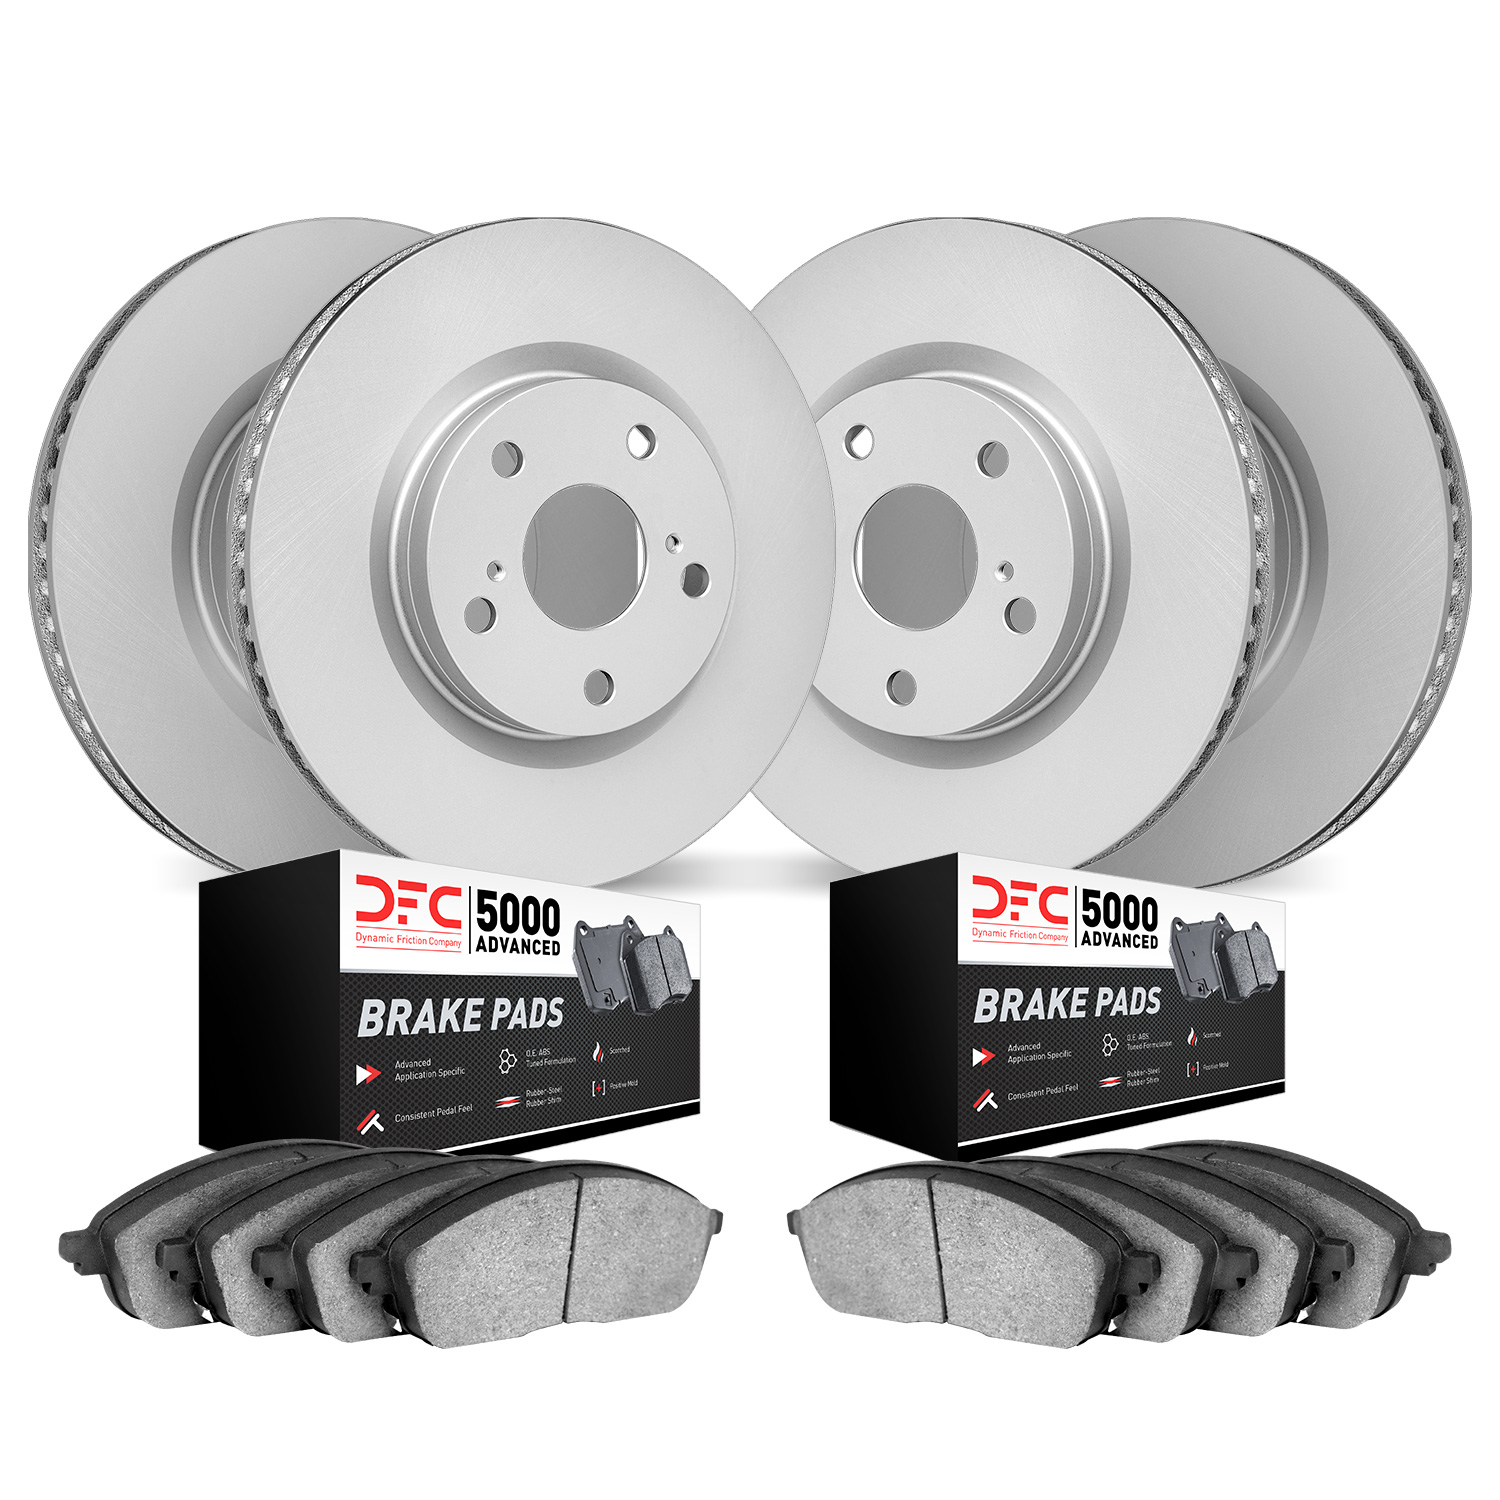 4504-80007 Geospec Brake Rotors w/5000 Advanced Brake Pads Kit, 2004-2008 Ford/Lincoln/Mercury/Mazda, Position: Front and Rear